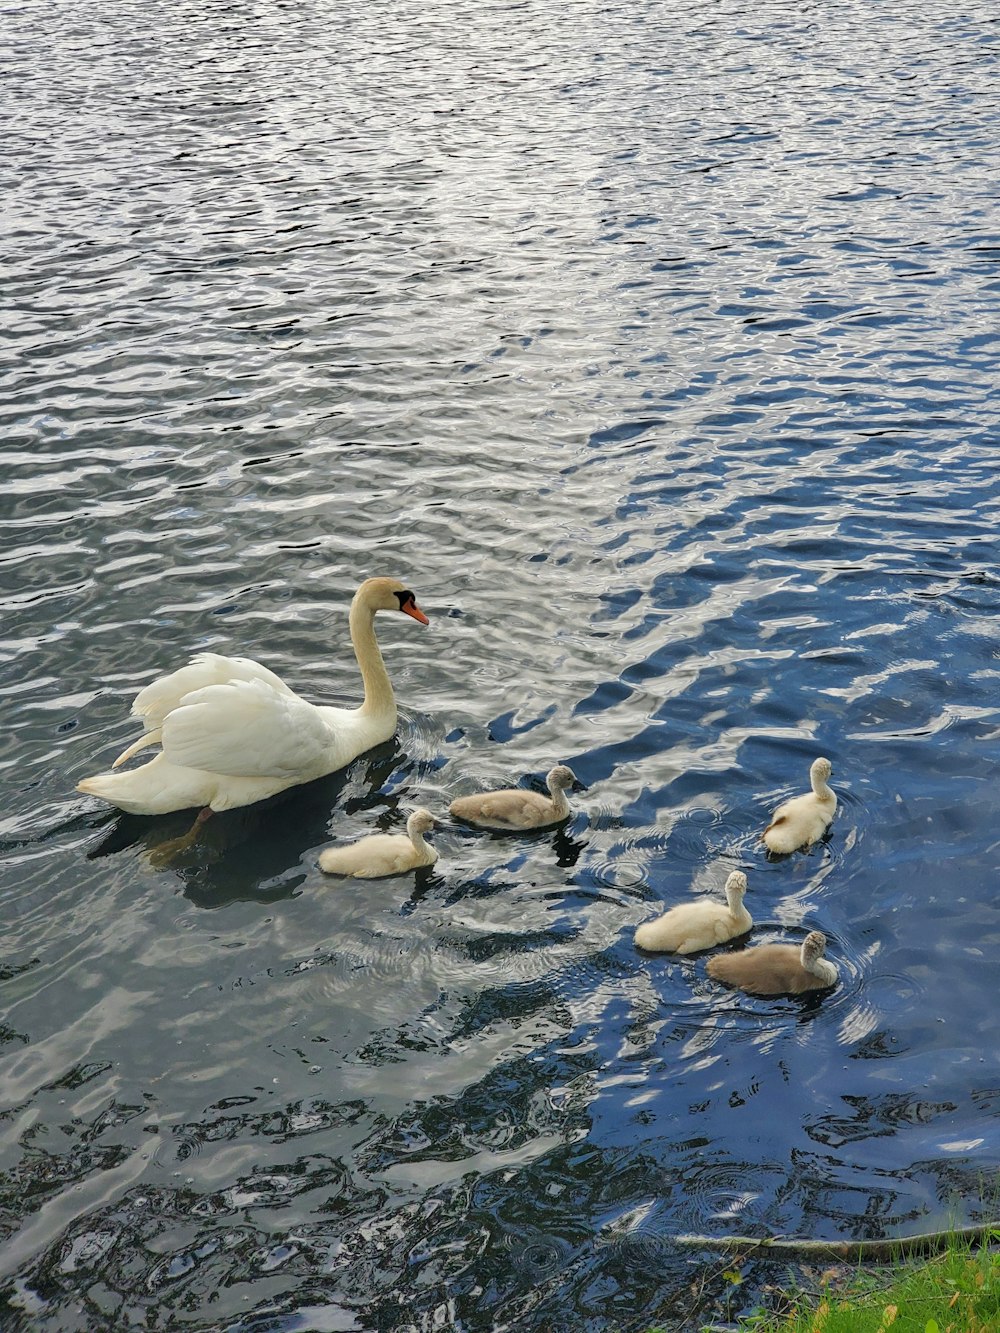 a group of ducks and swans swimming in a lake